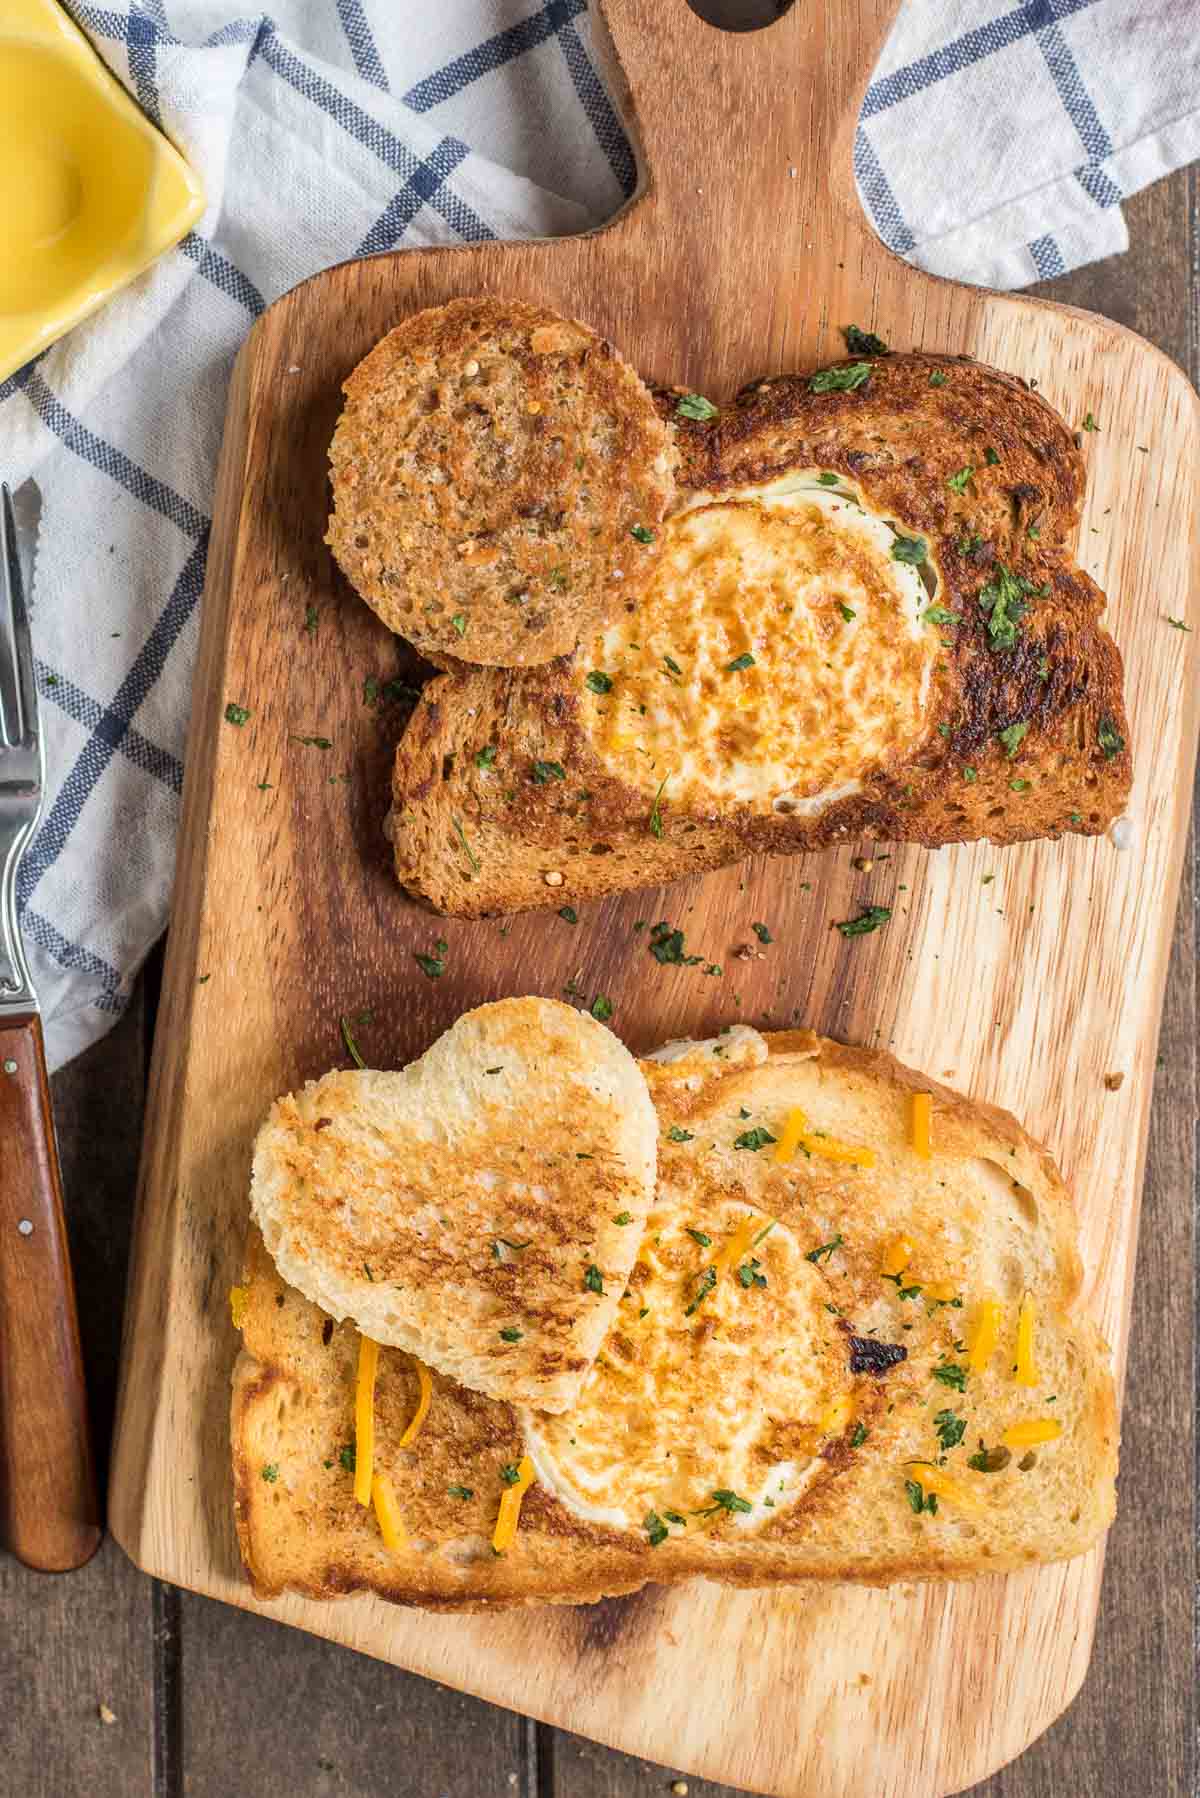 Cooked eggs in a basket recipe served on a board